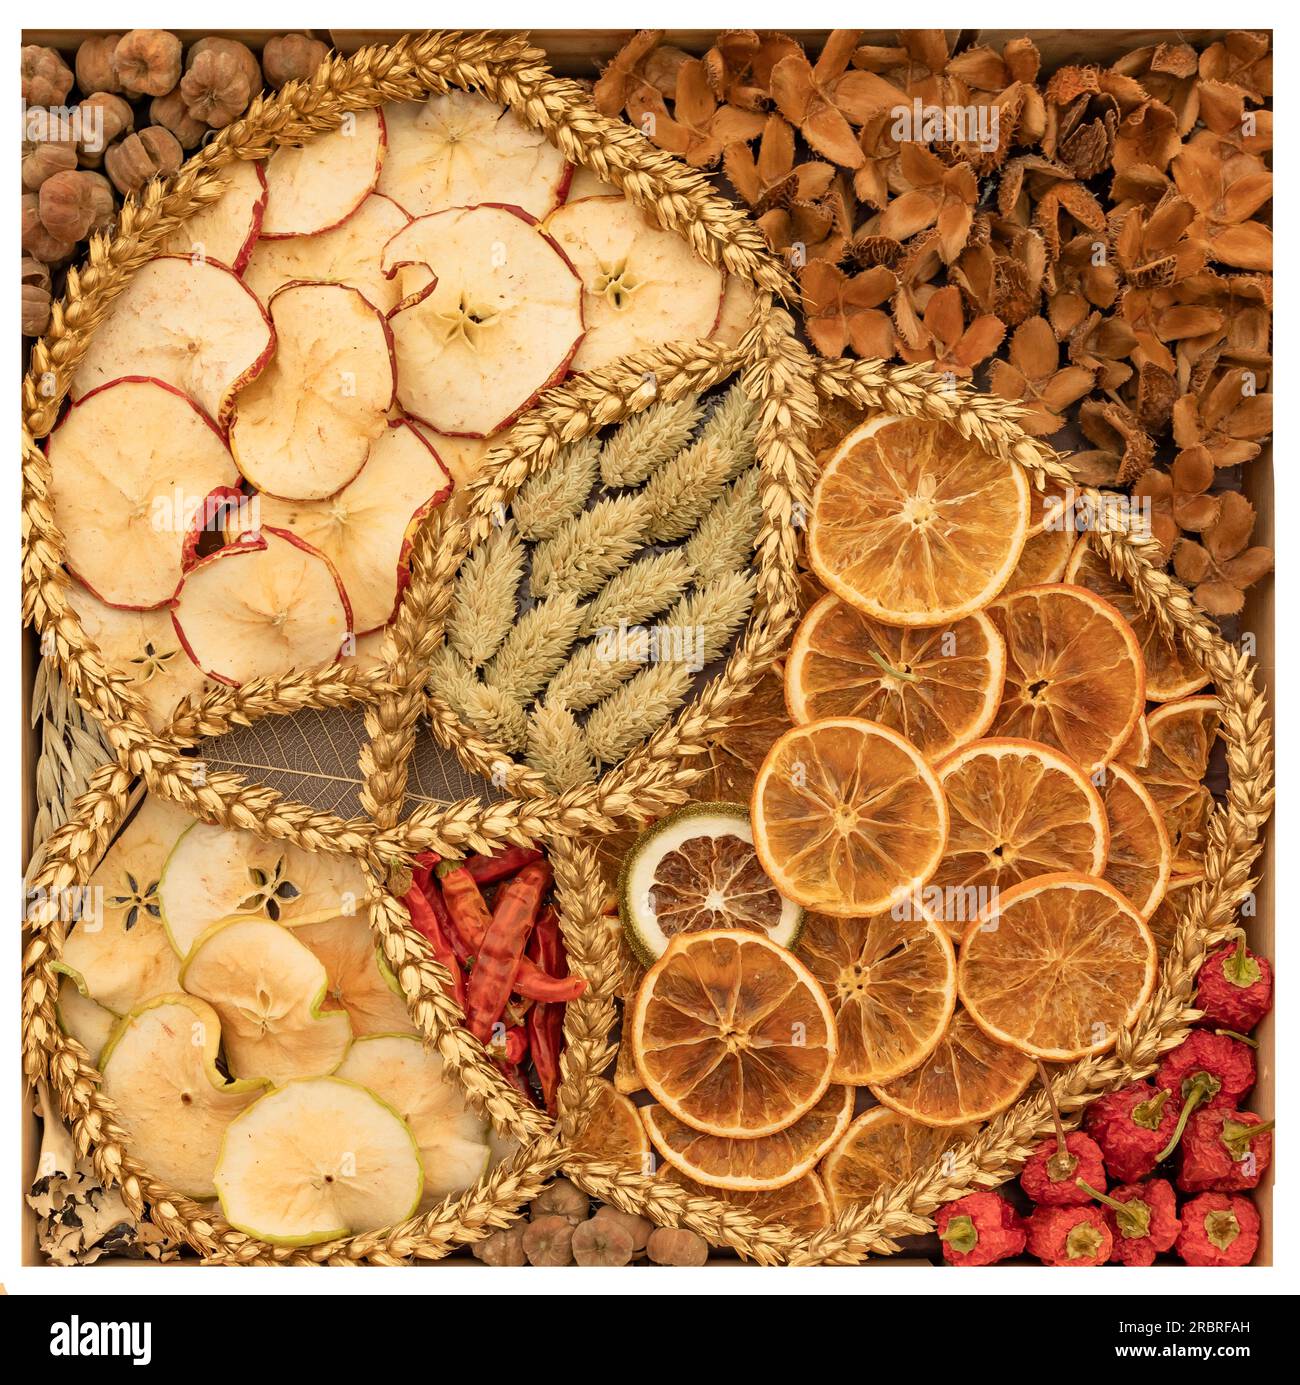 Dried fruit background with white border Stock Photo